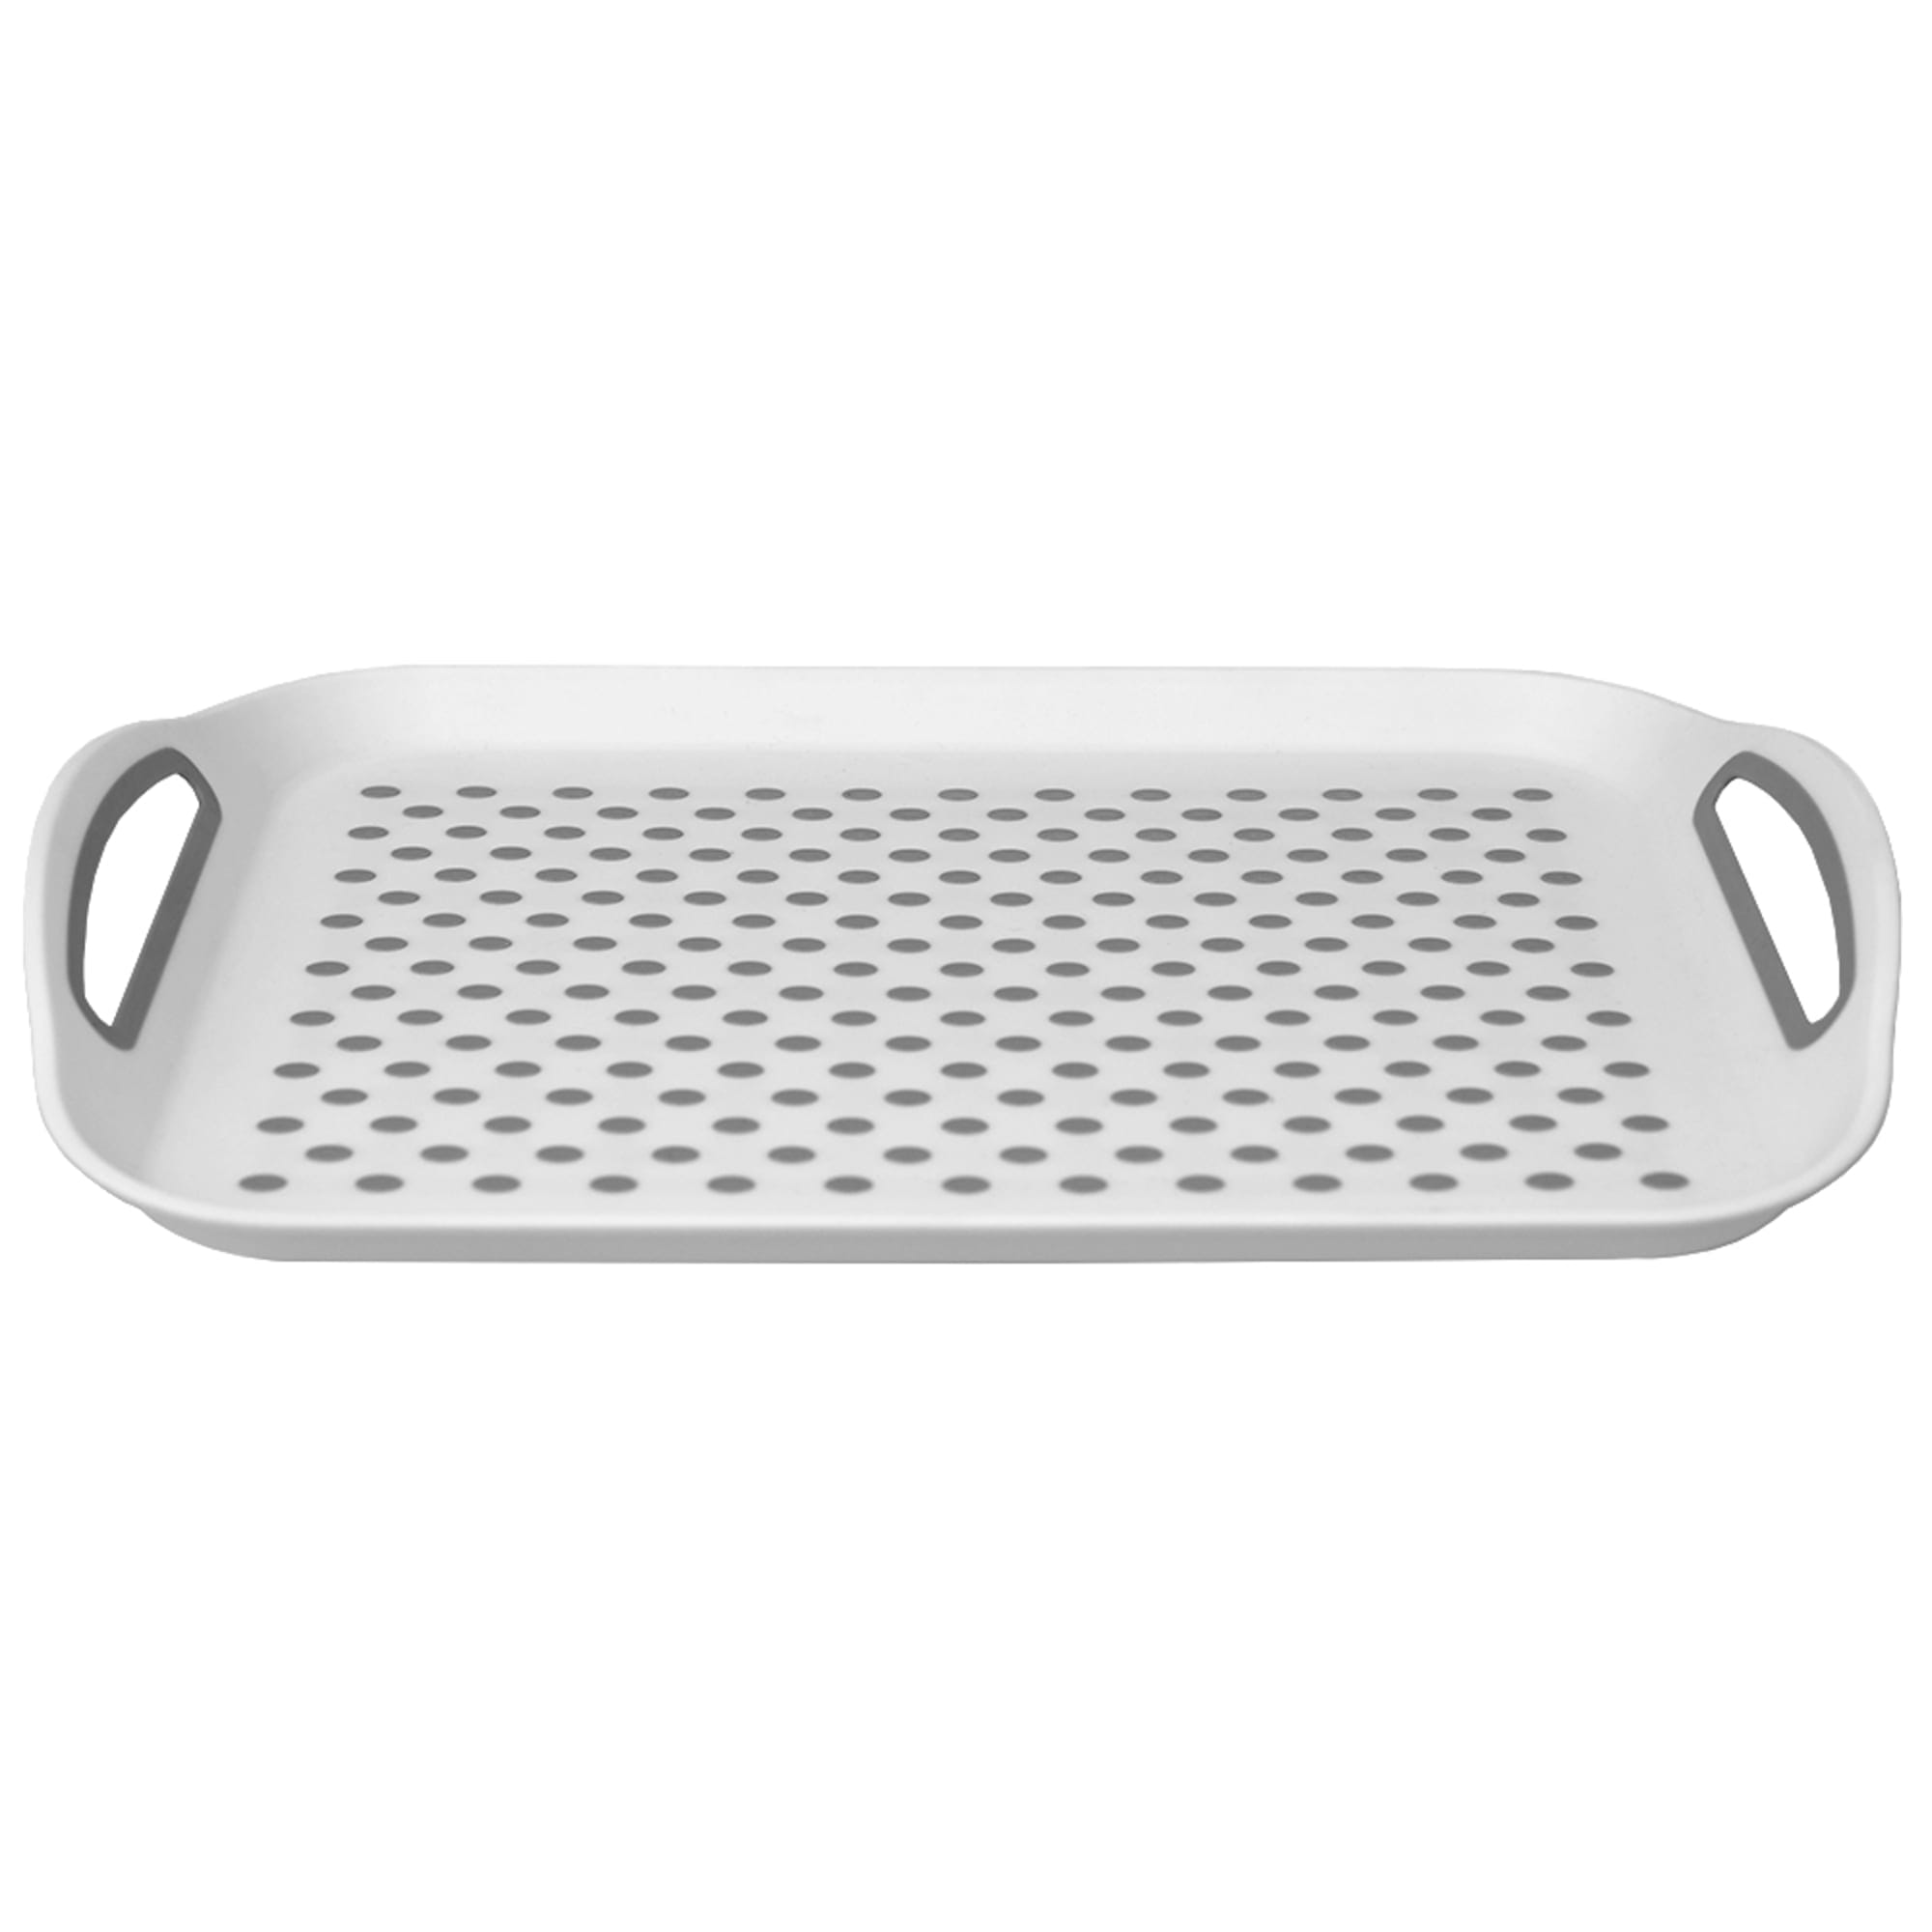 Home Basics Anti-Slip Plastic Serving Tray with Easy Grip Handles, White $3.00 EACH, CASE PACK OF 12